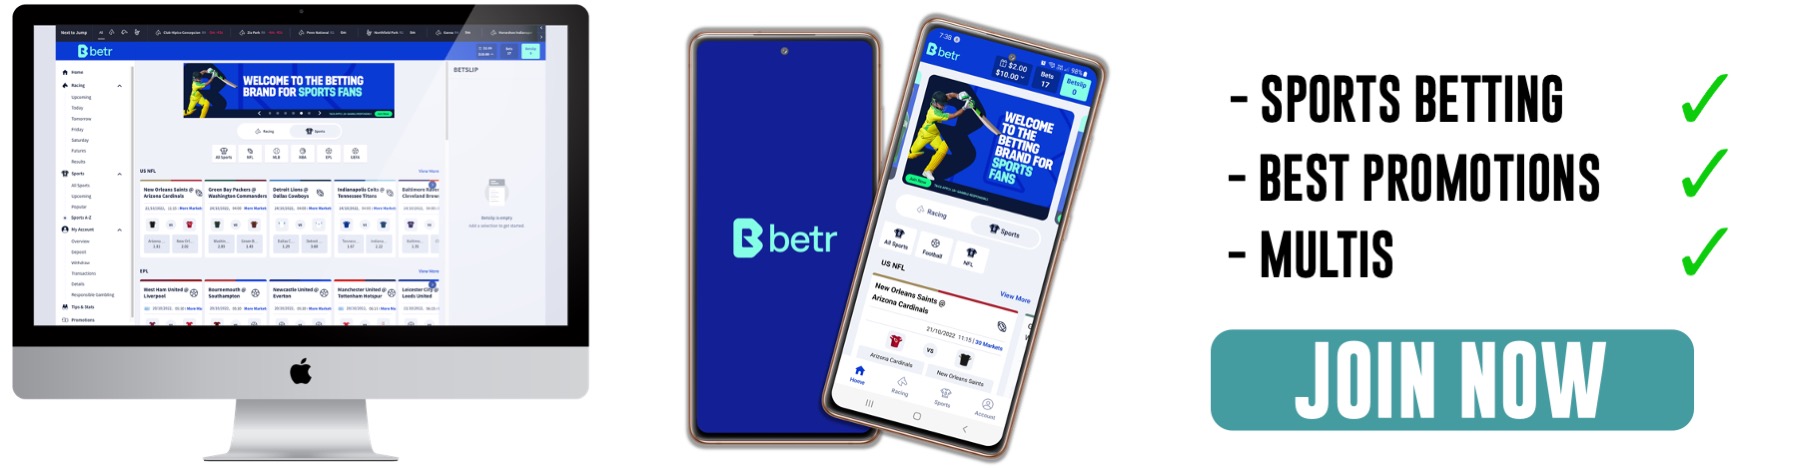 Betr Betting Site